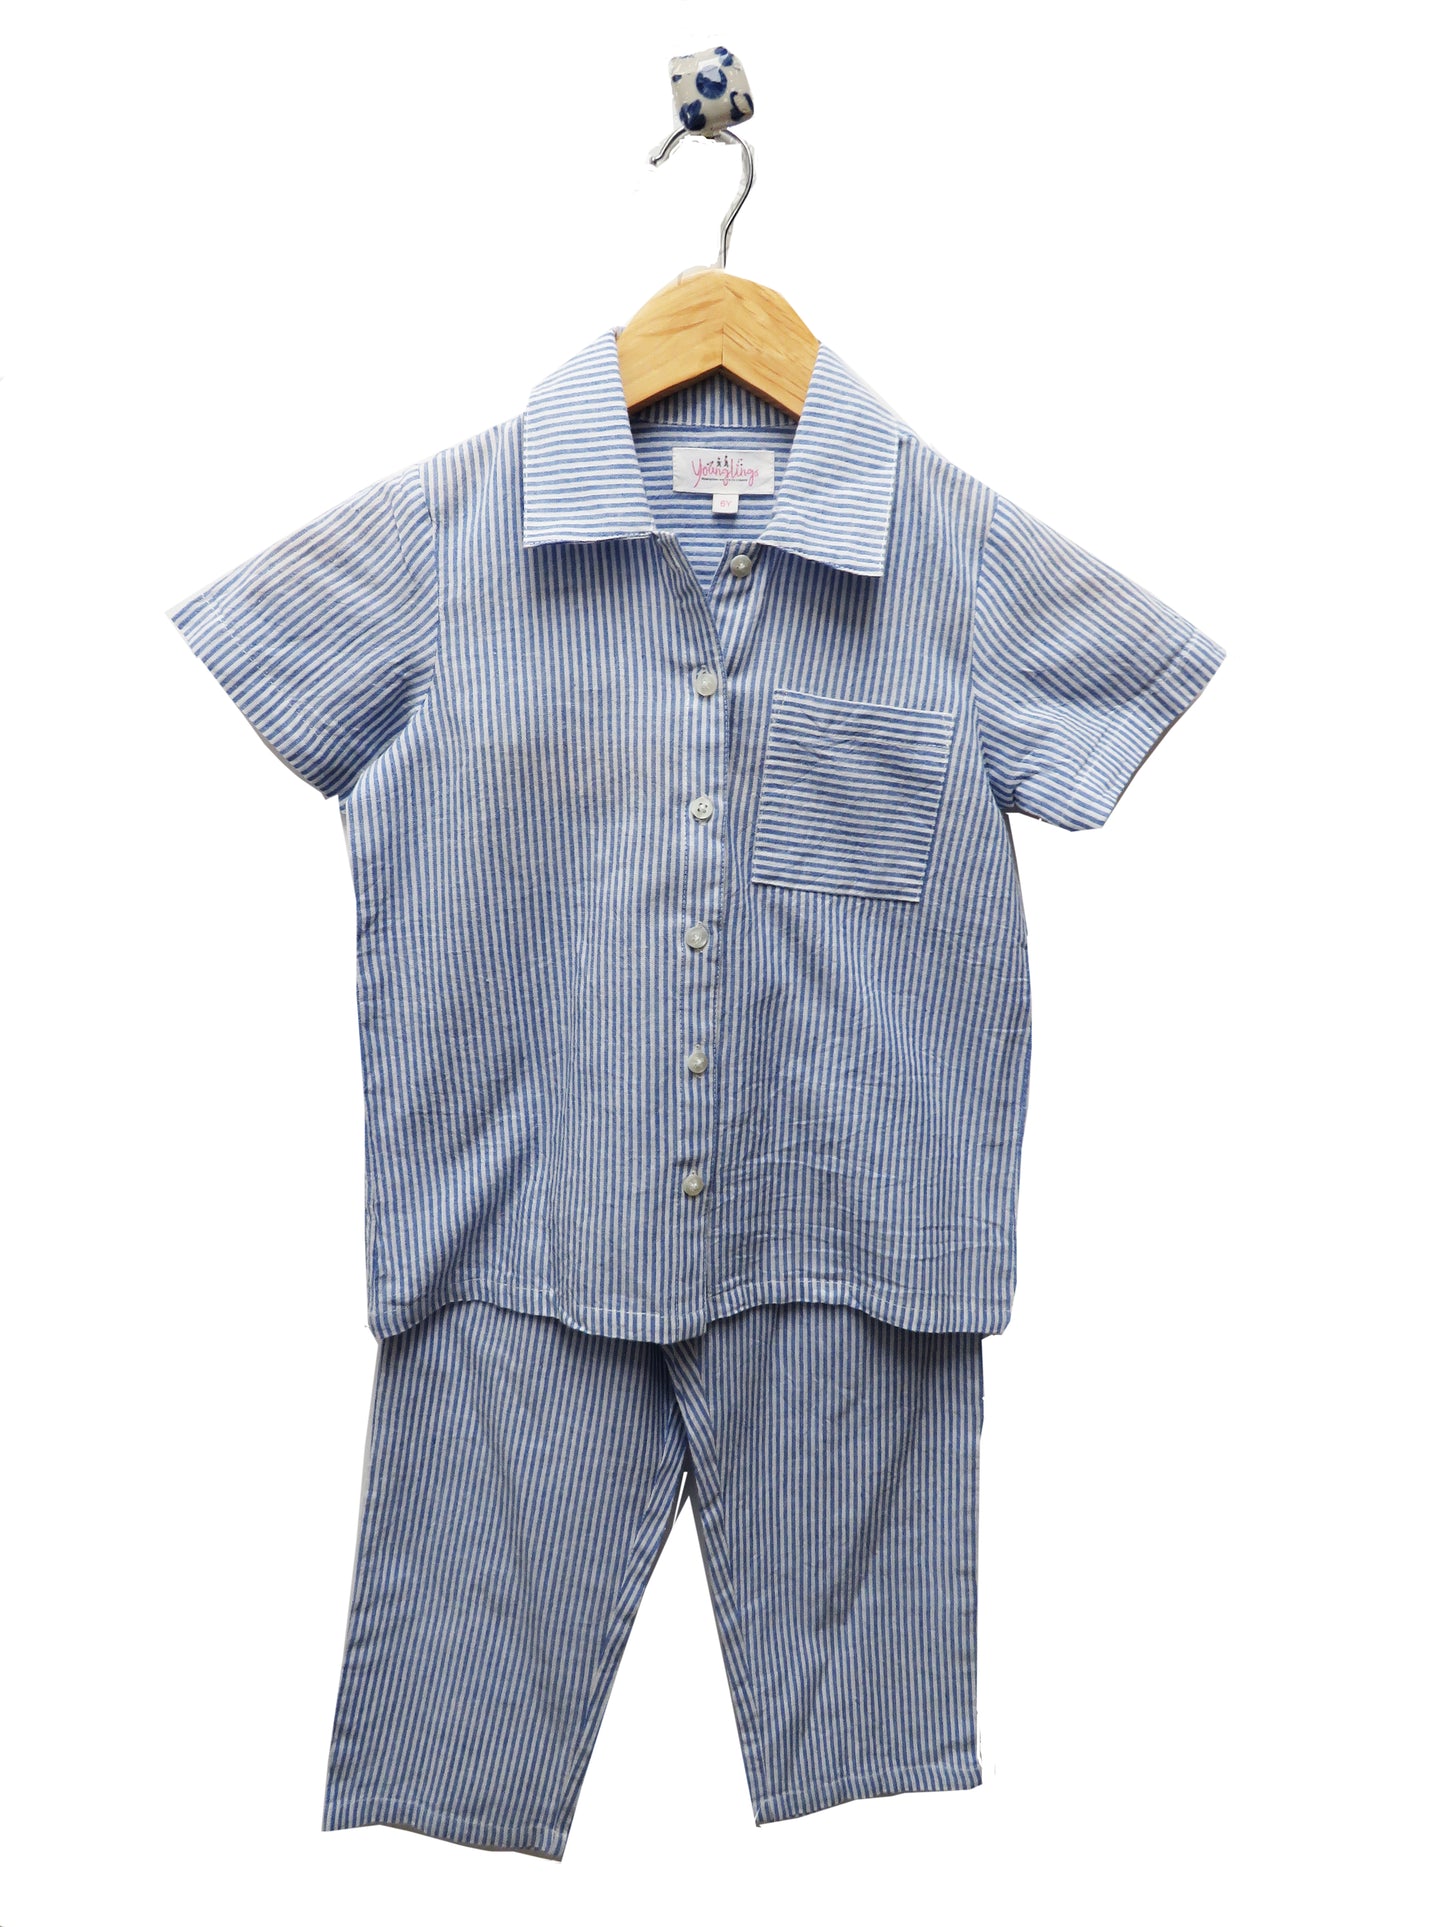 Classic Blue And White Striped Nightsuit Set